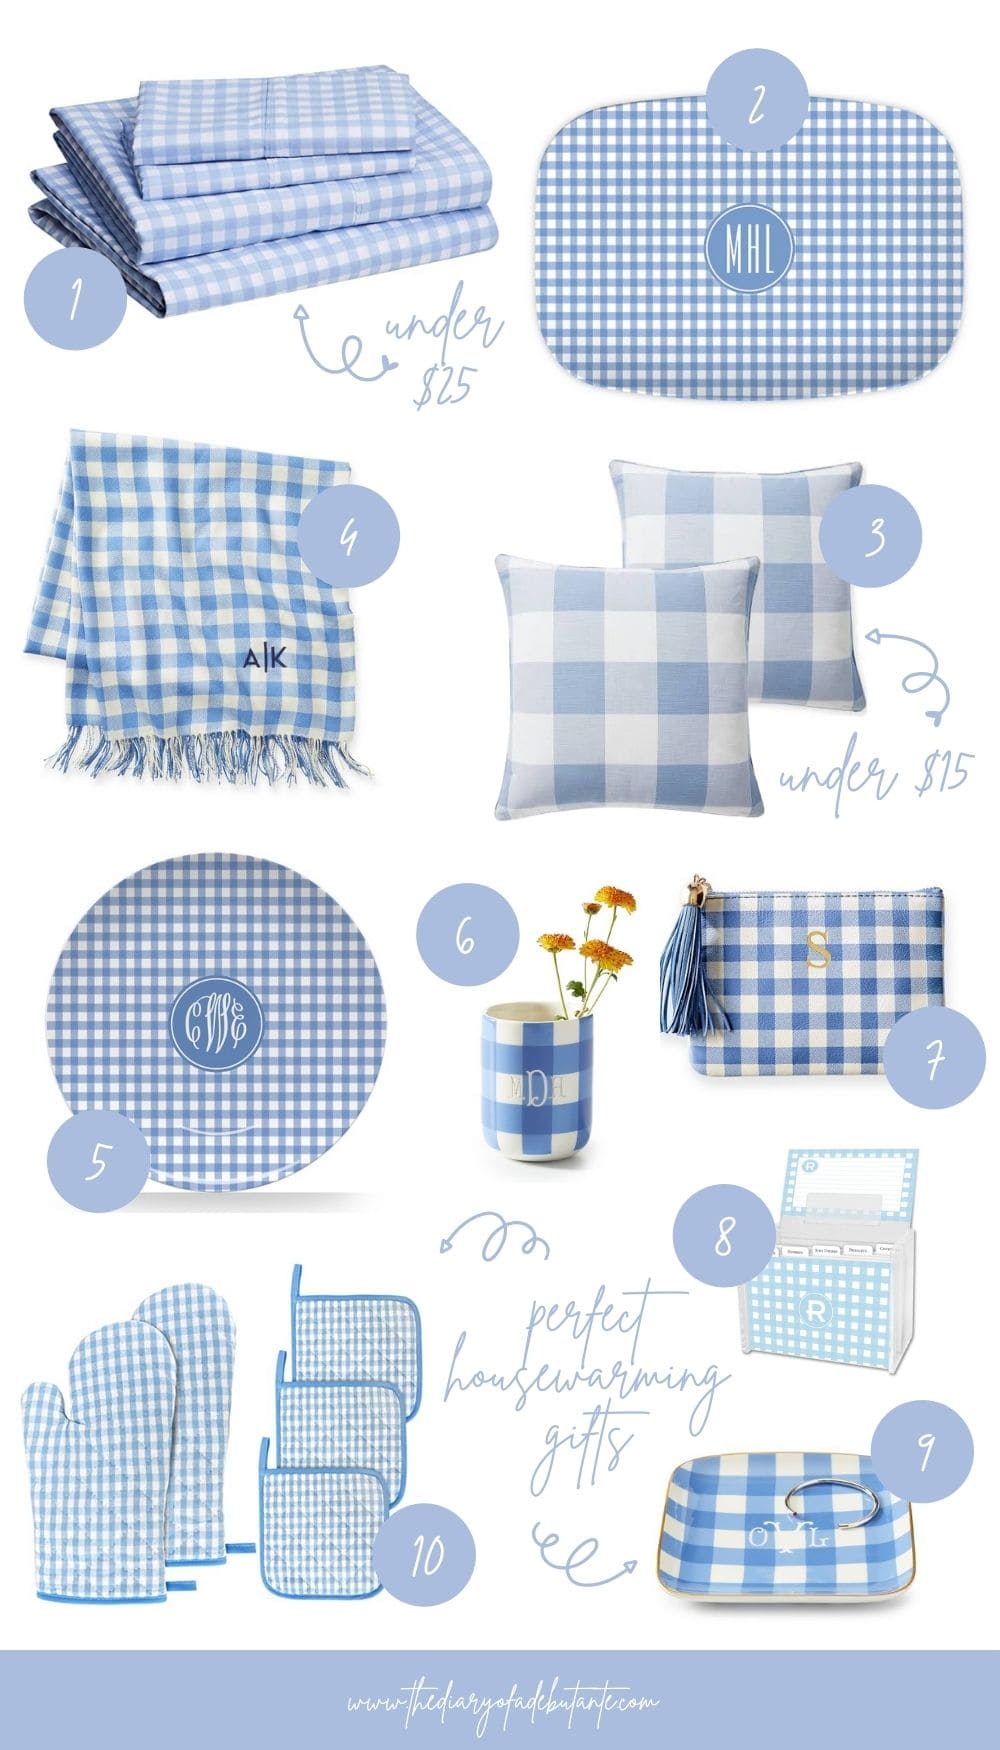 Light blue gingham decorating ideas for summer from blogger Stephanie Ziajka on Diary of a Debutante